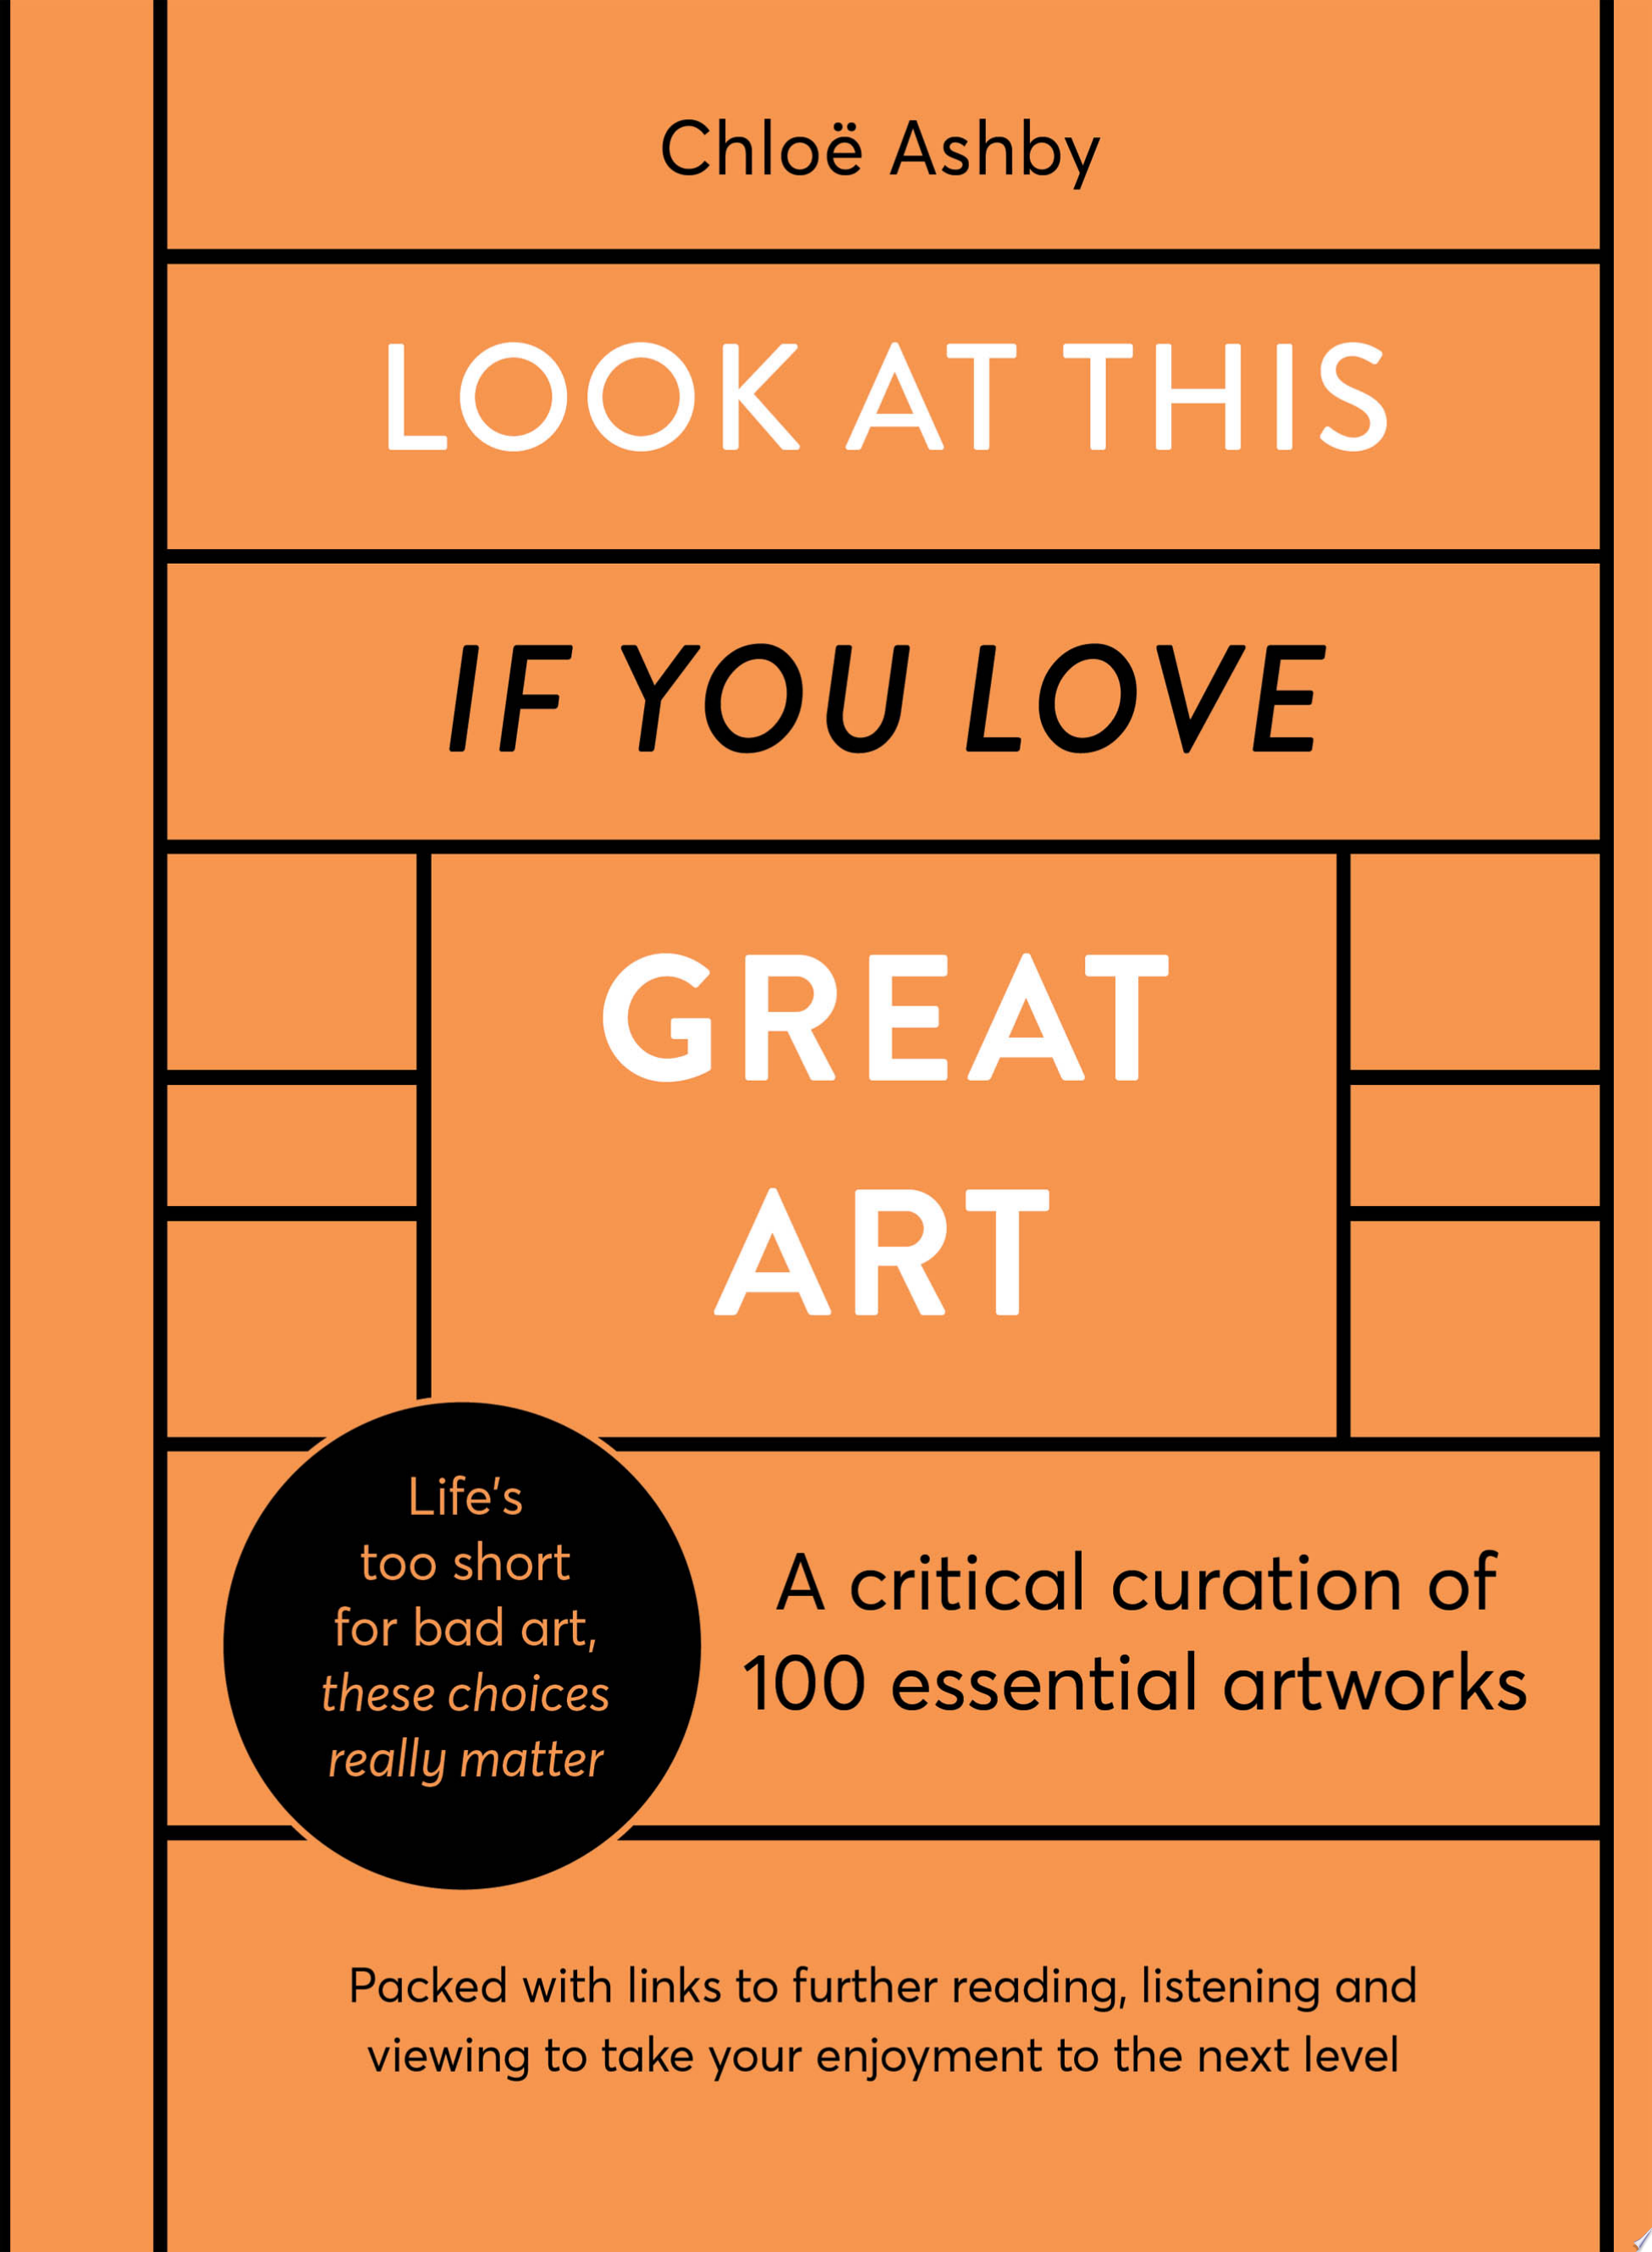 Image for "Look At This If You Love Great Art"